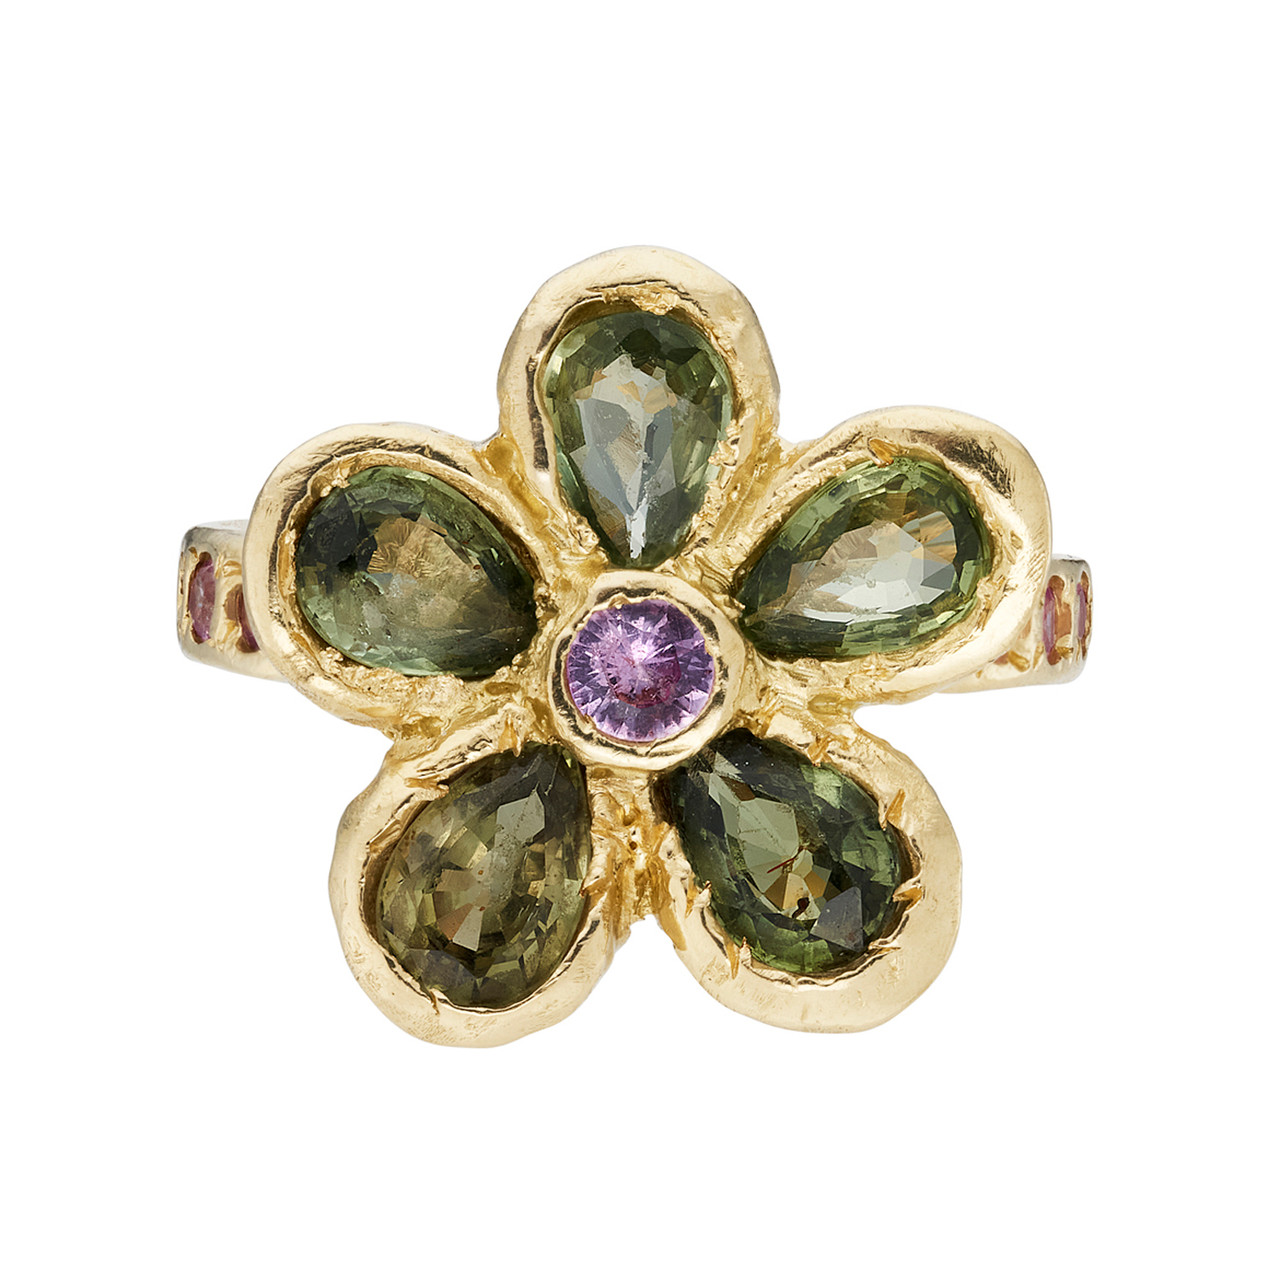 One-Of-A-Kind Sapphire Blossom Flower Ring, Leto Lama, tomfoolery